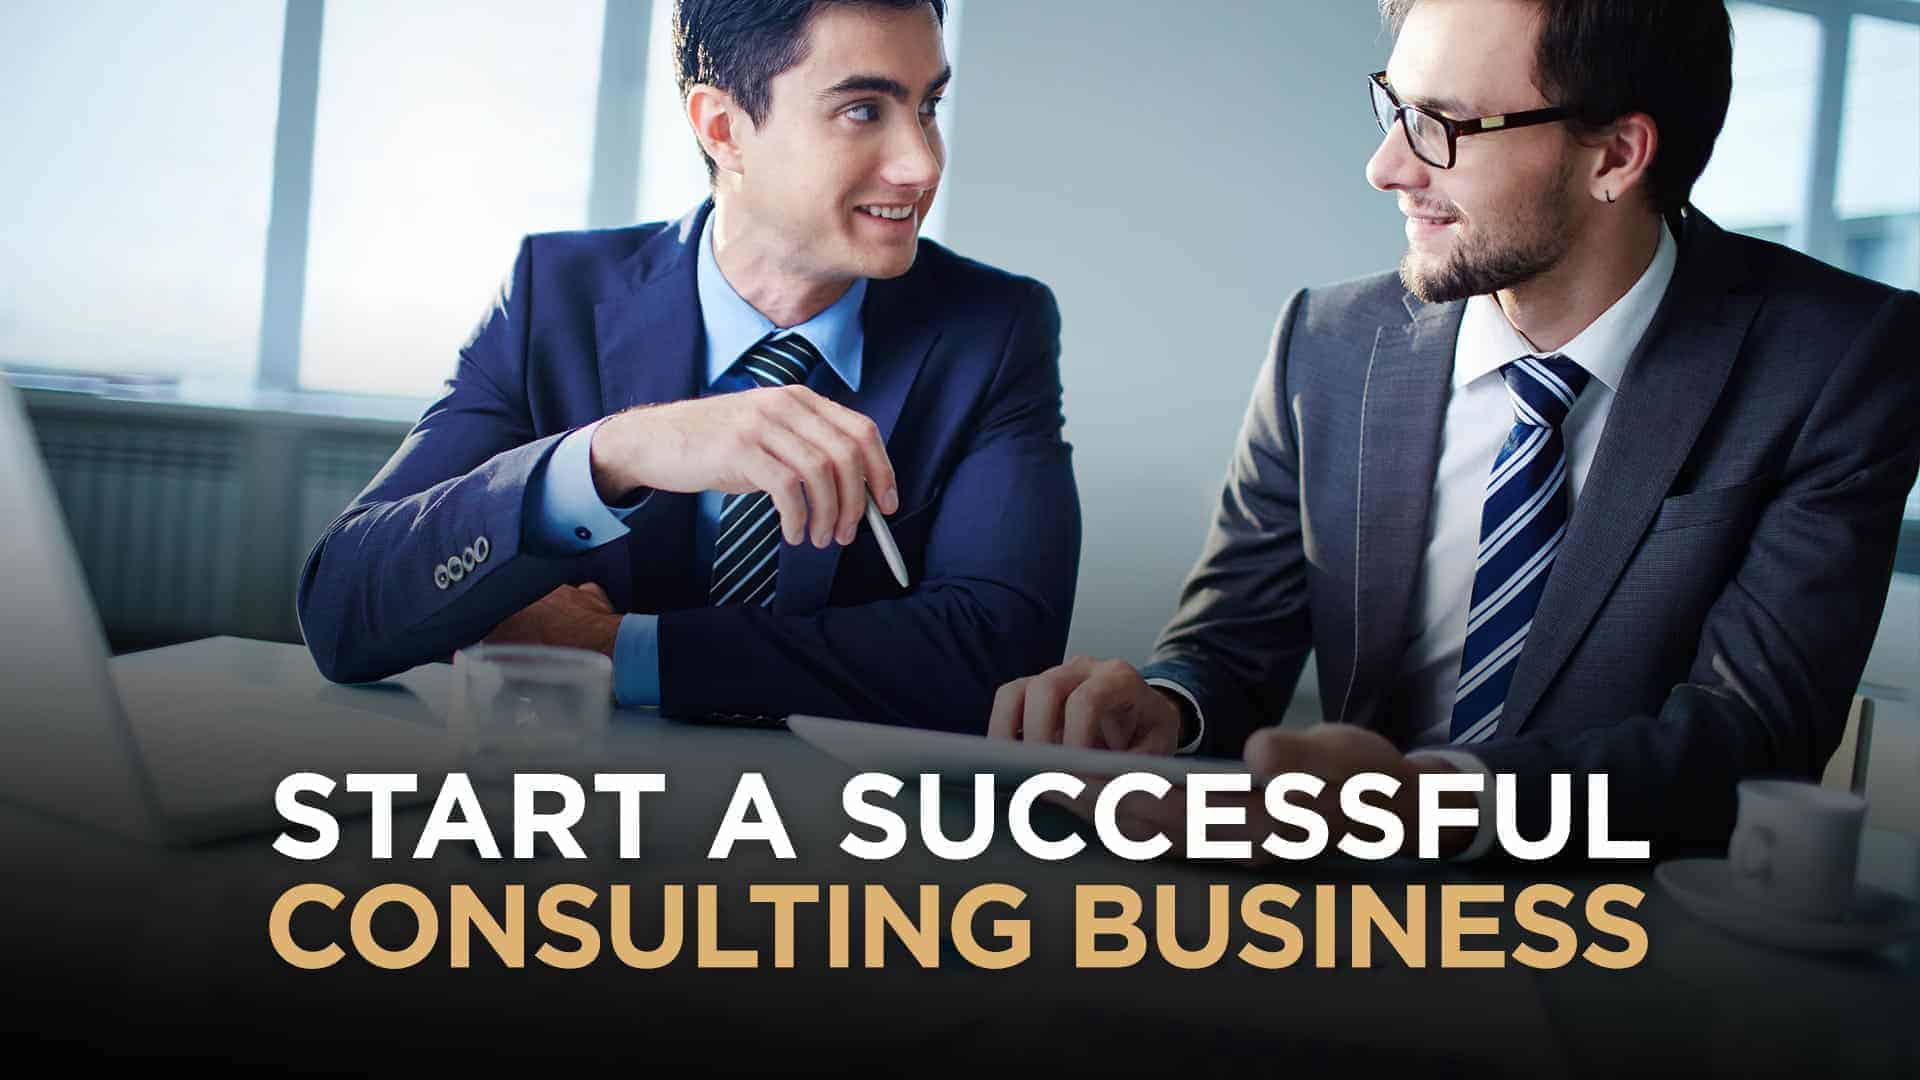 How To Start A Successful Consulting Business